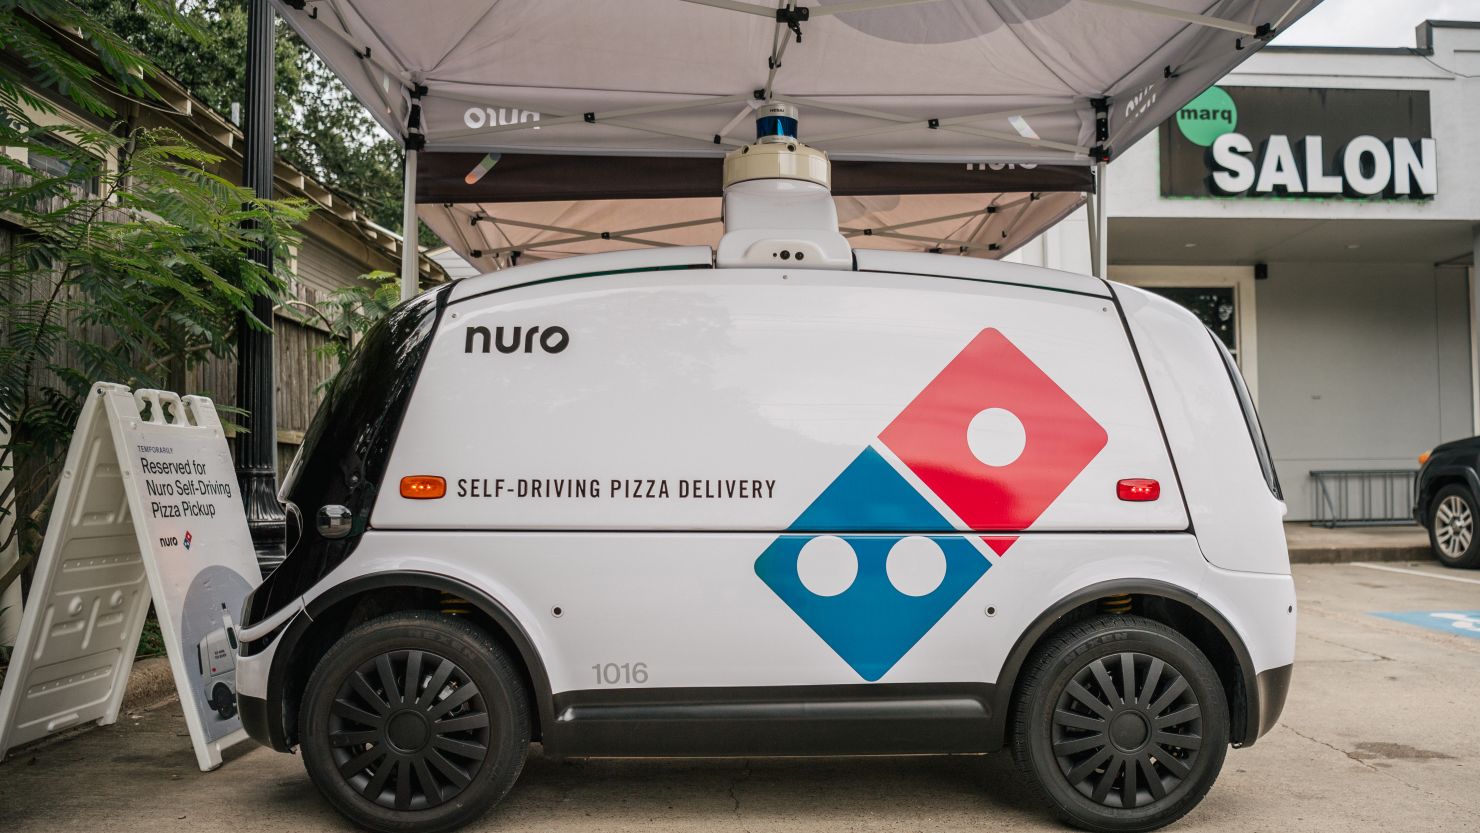 Domino's Pizza is one company exploring self-driving delivery vehicles like the one pictured here from July 2021.